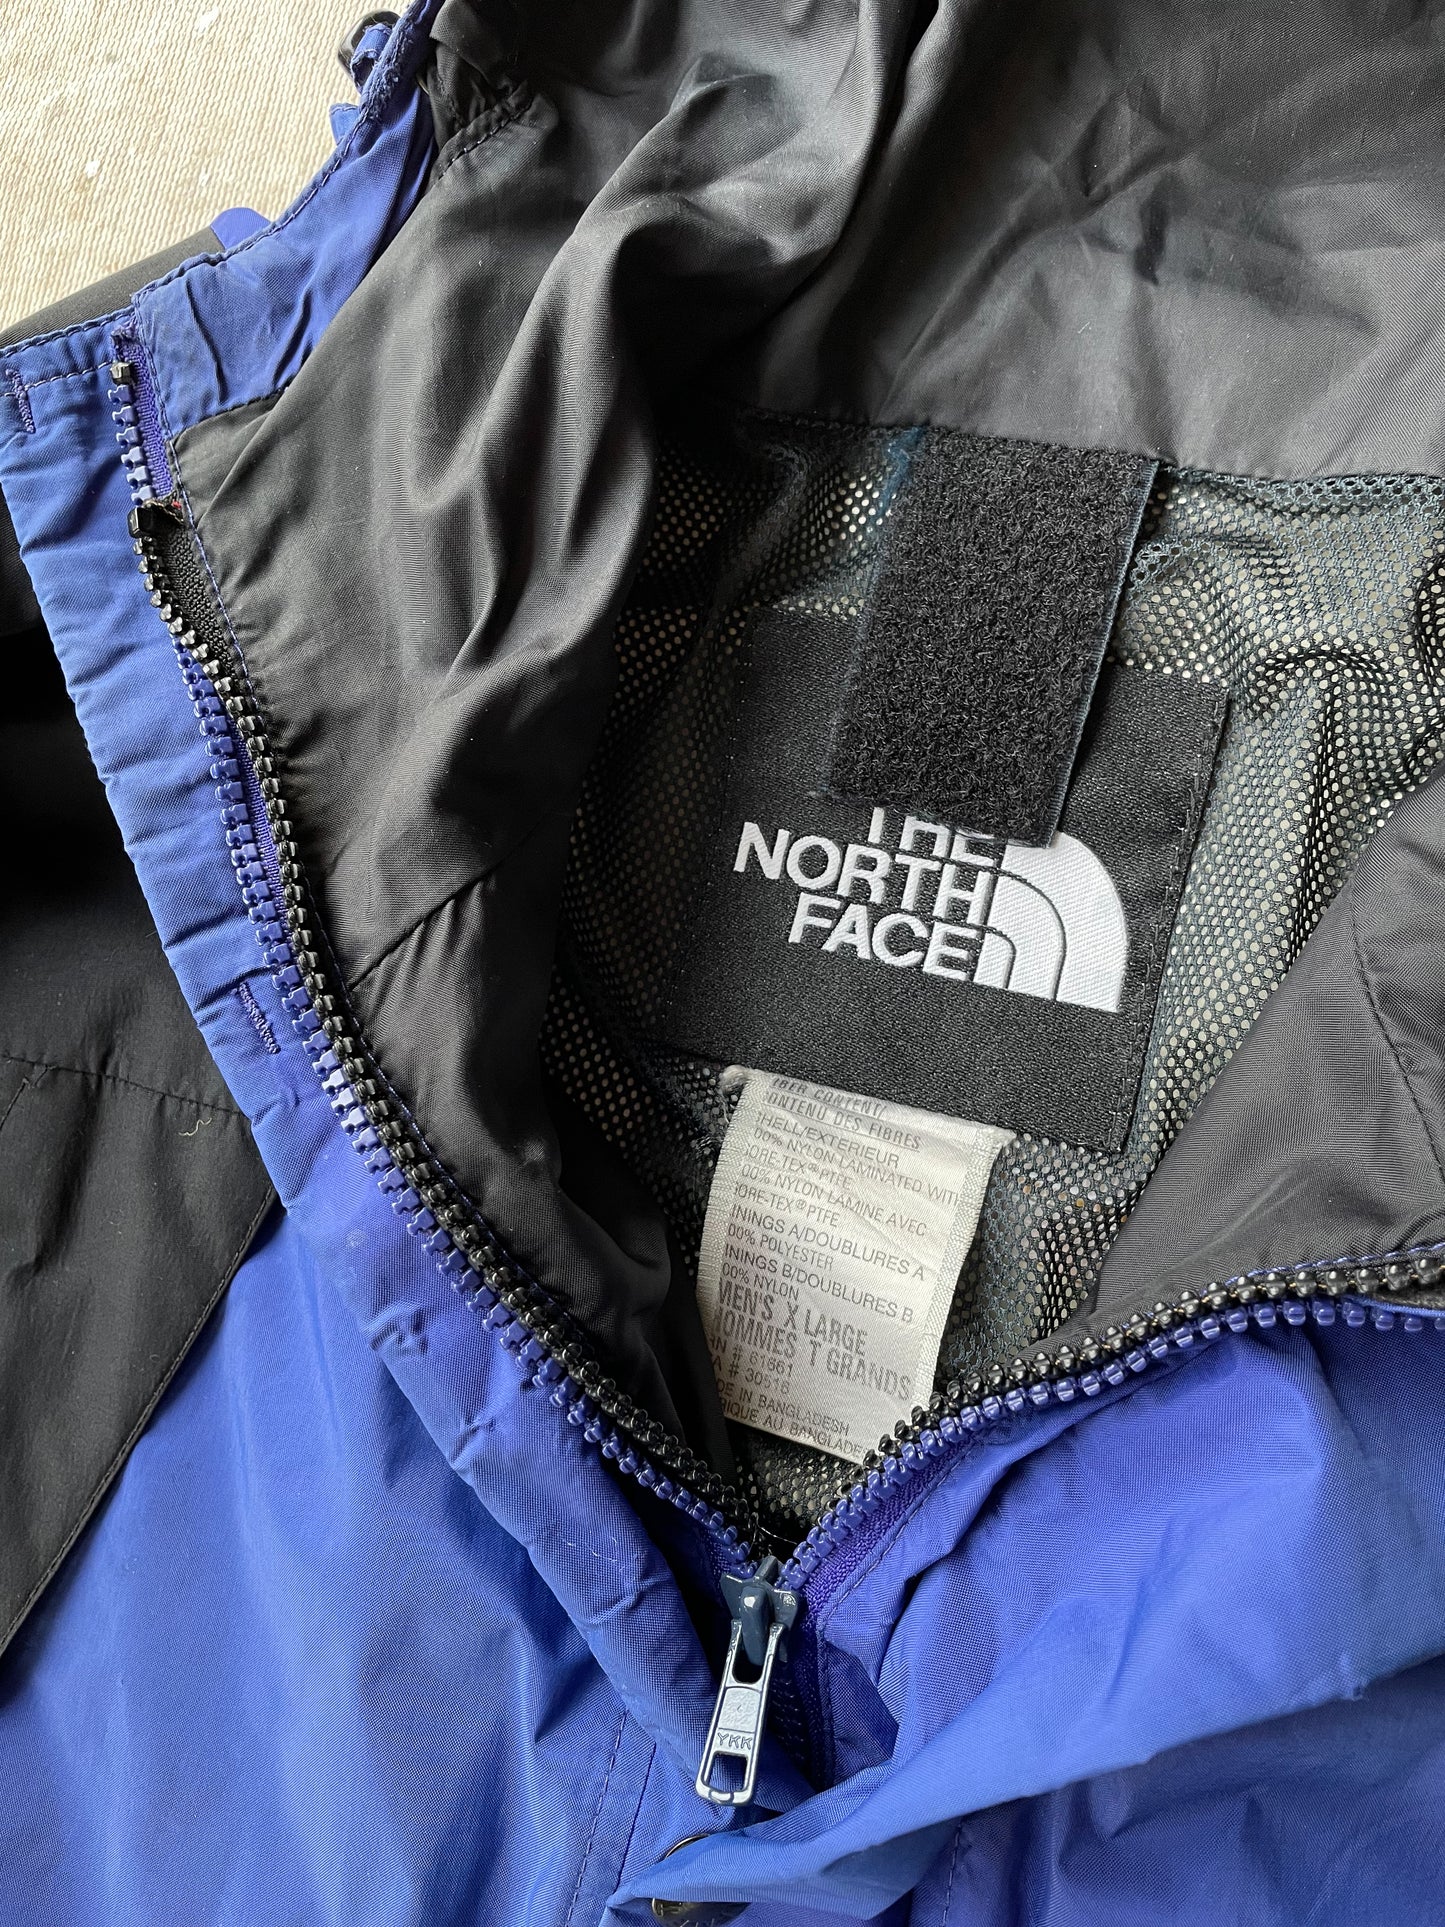 THE NORTH FACE JACKET—BLUE [XL]